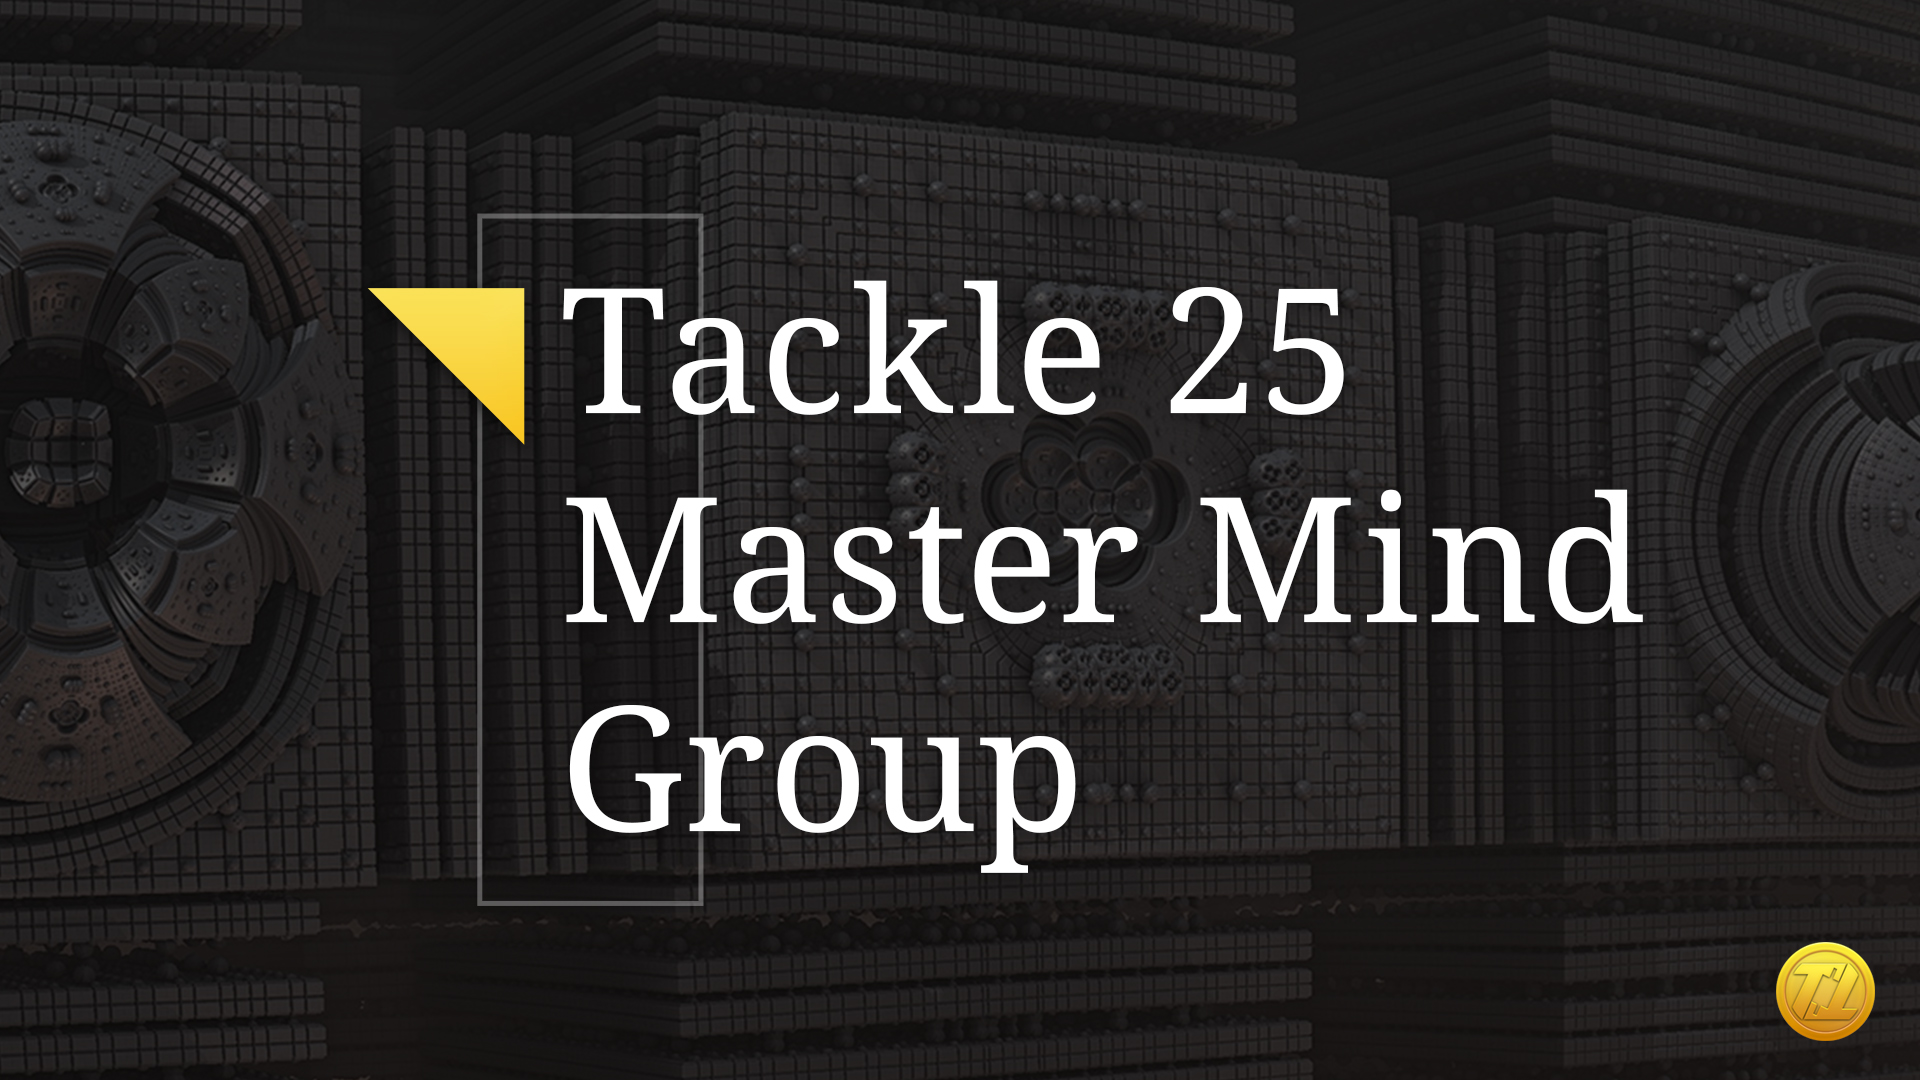 Tackle Trading Premium System: Tackle 25 MasterMind Group